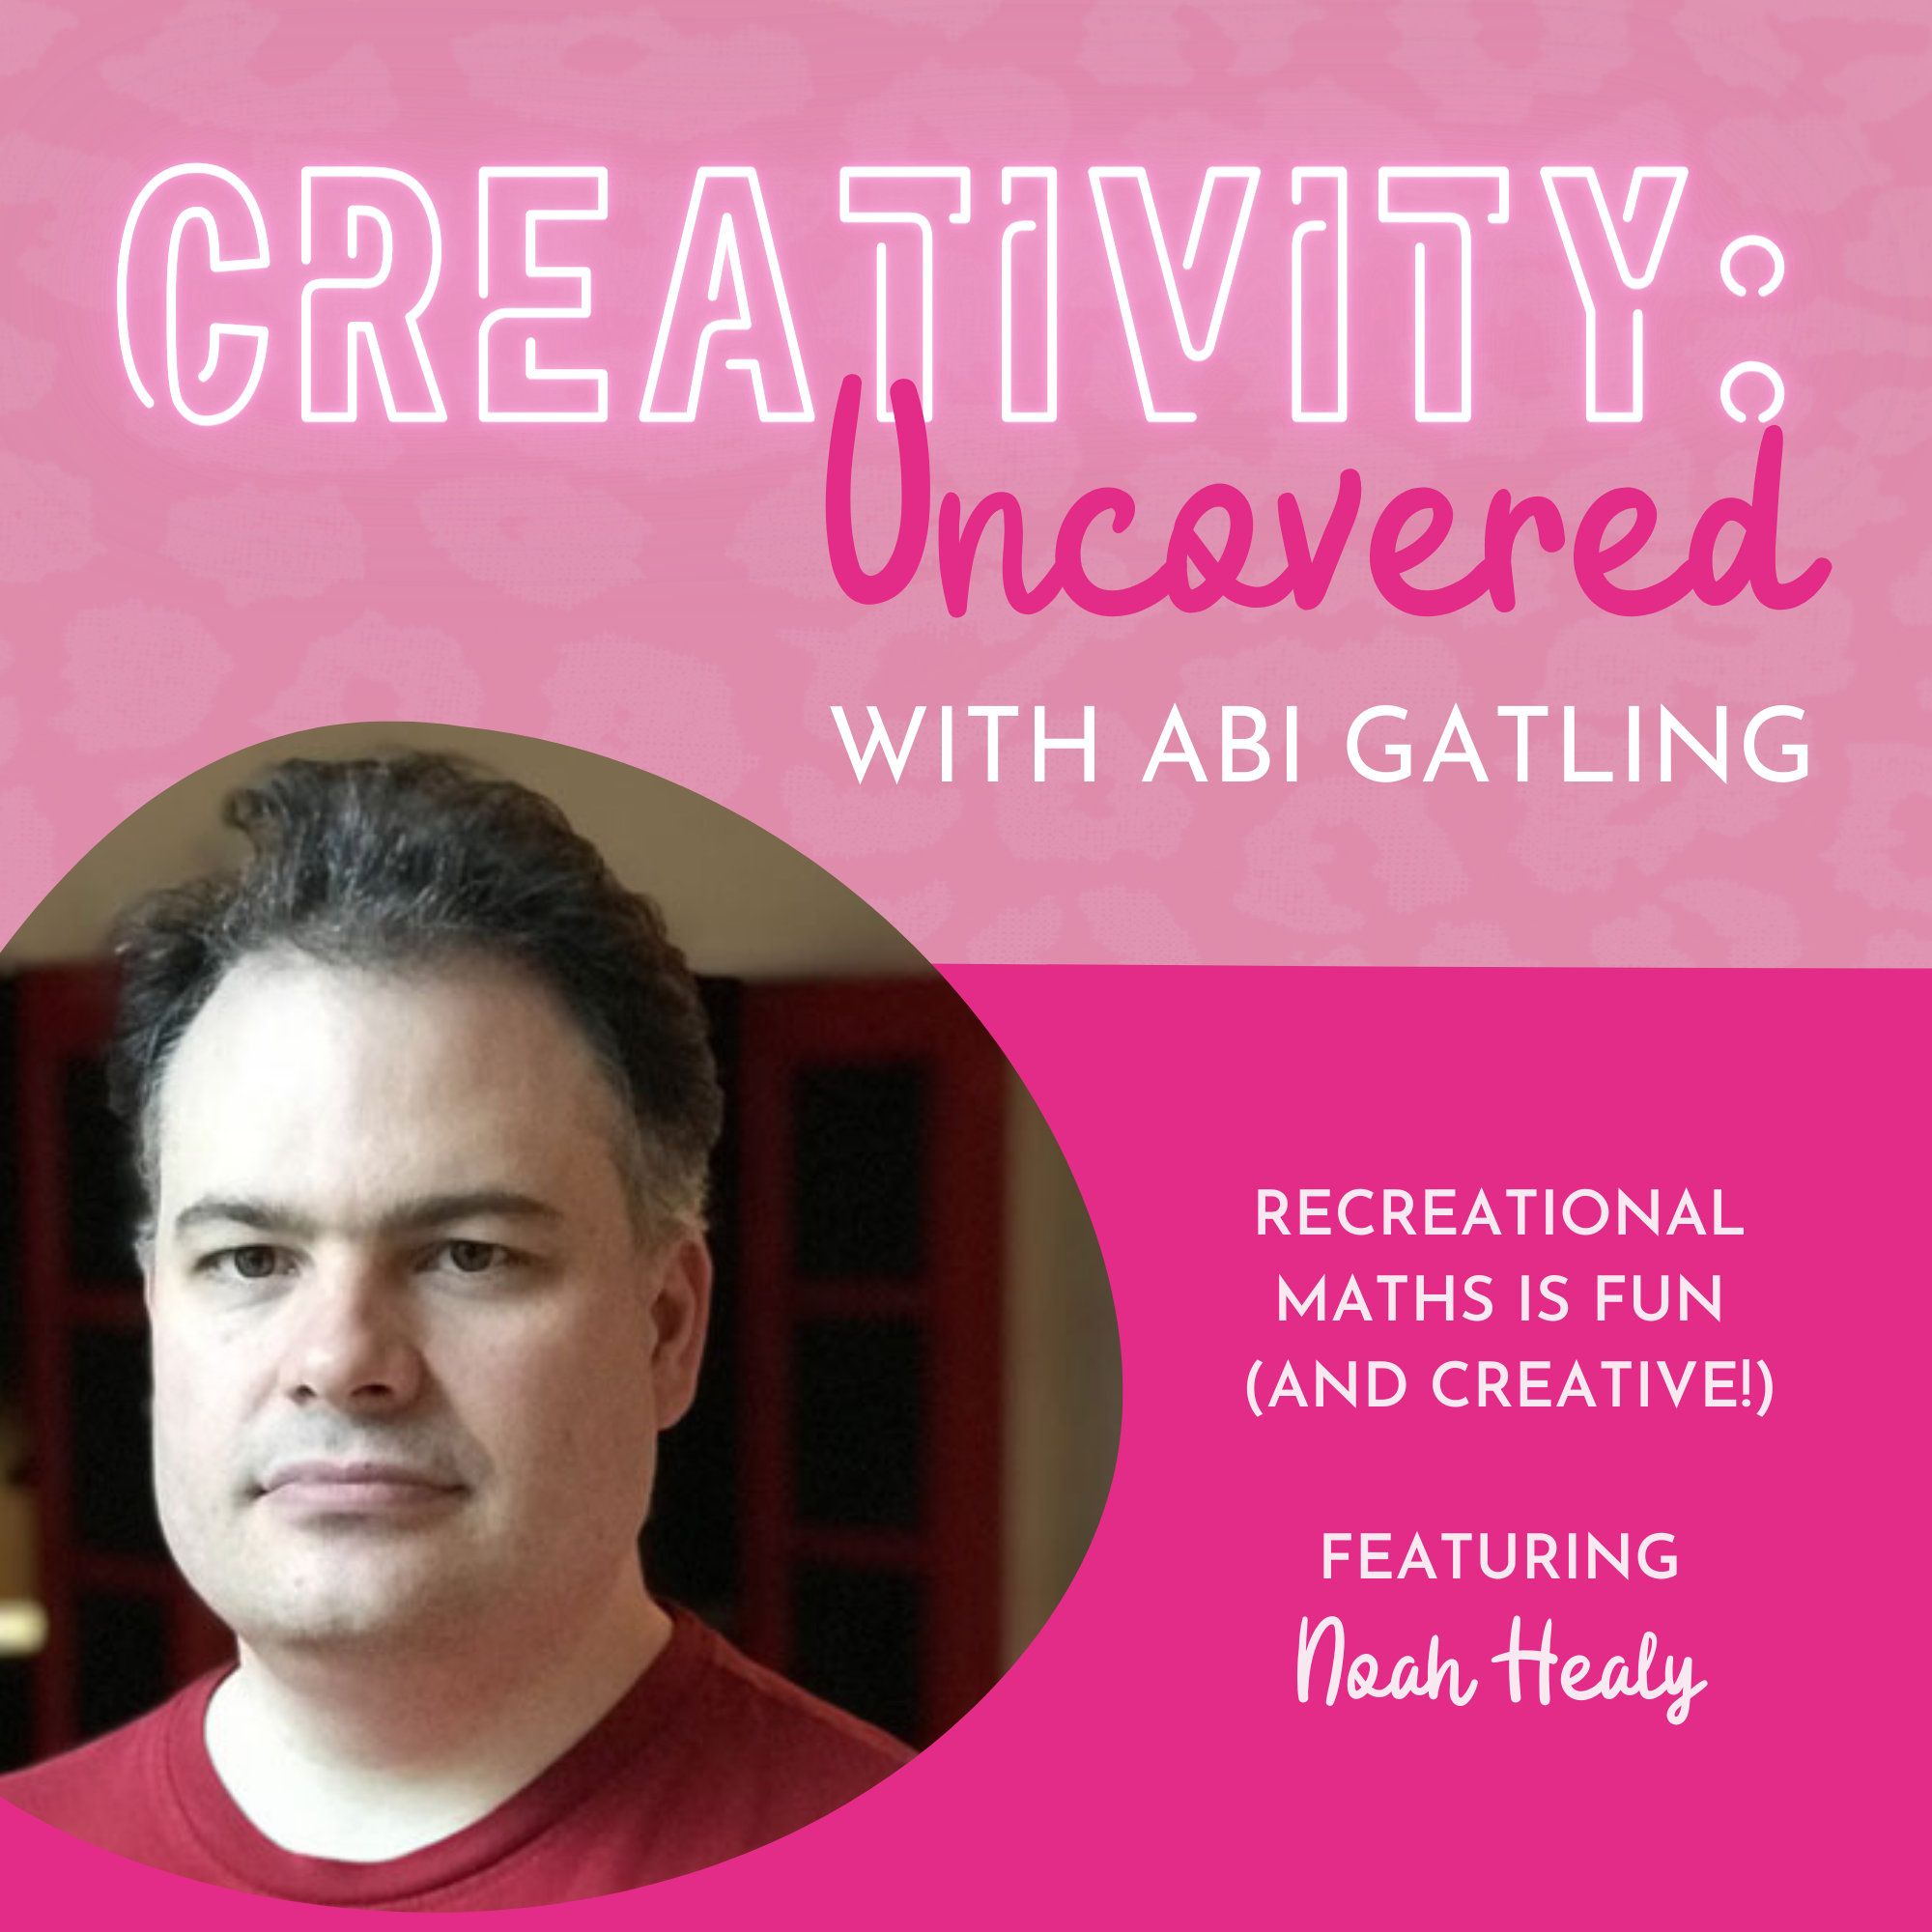 Creativity: Uncovered podcast episode graphic featuring guest Noah Healy